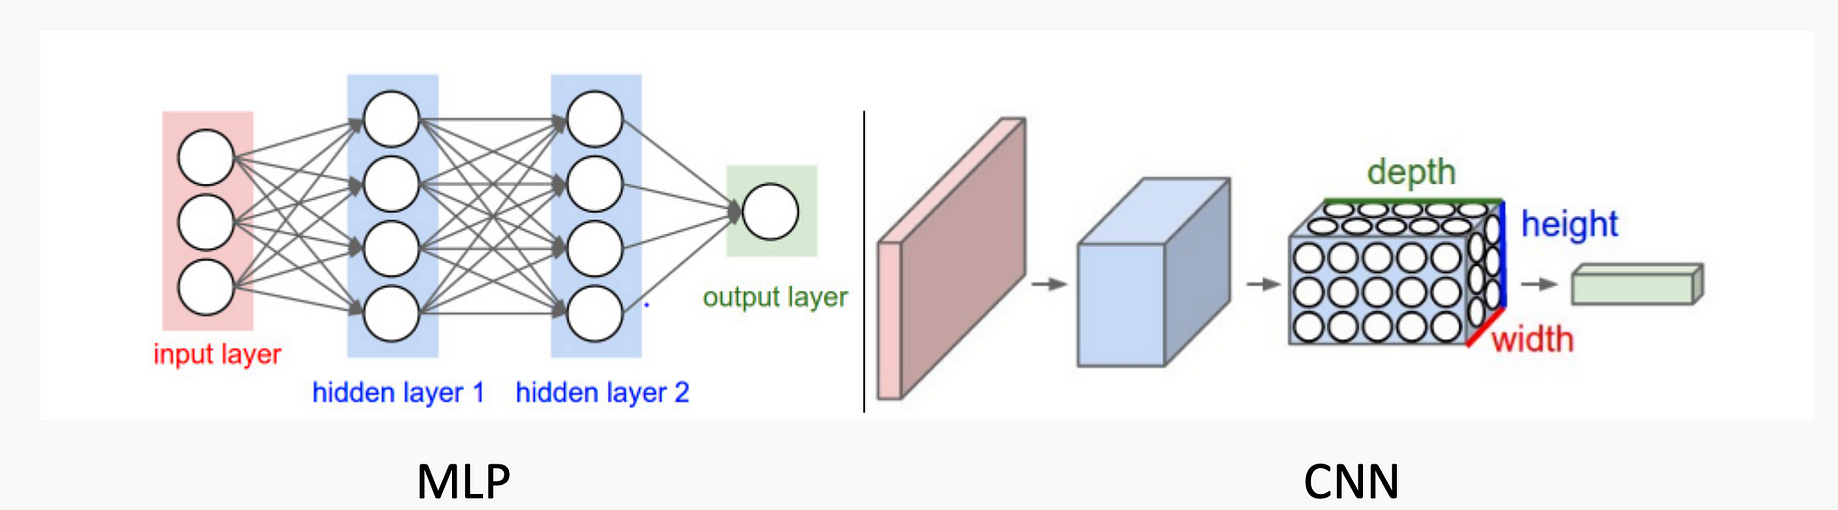 Simple Introduction to Convolutional Neural Networks  by Matthew